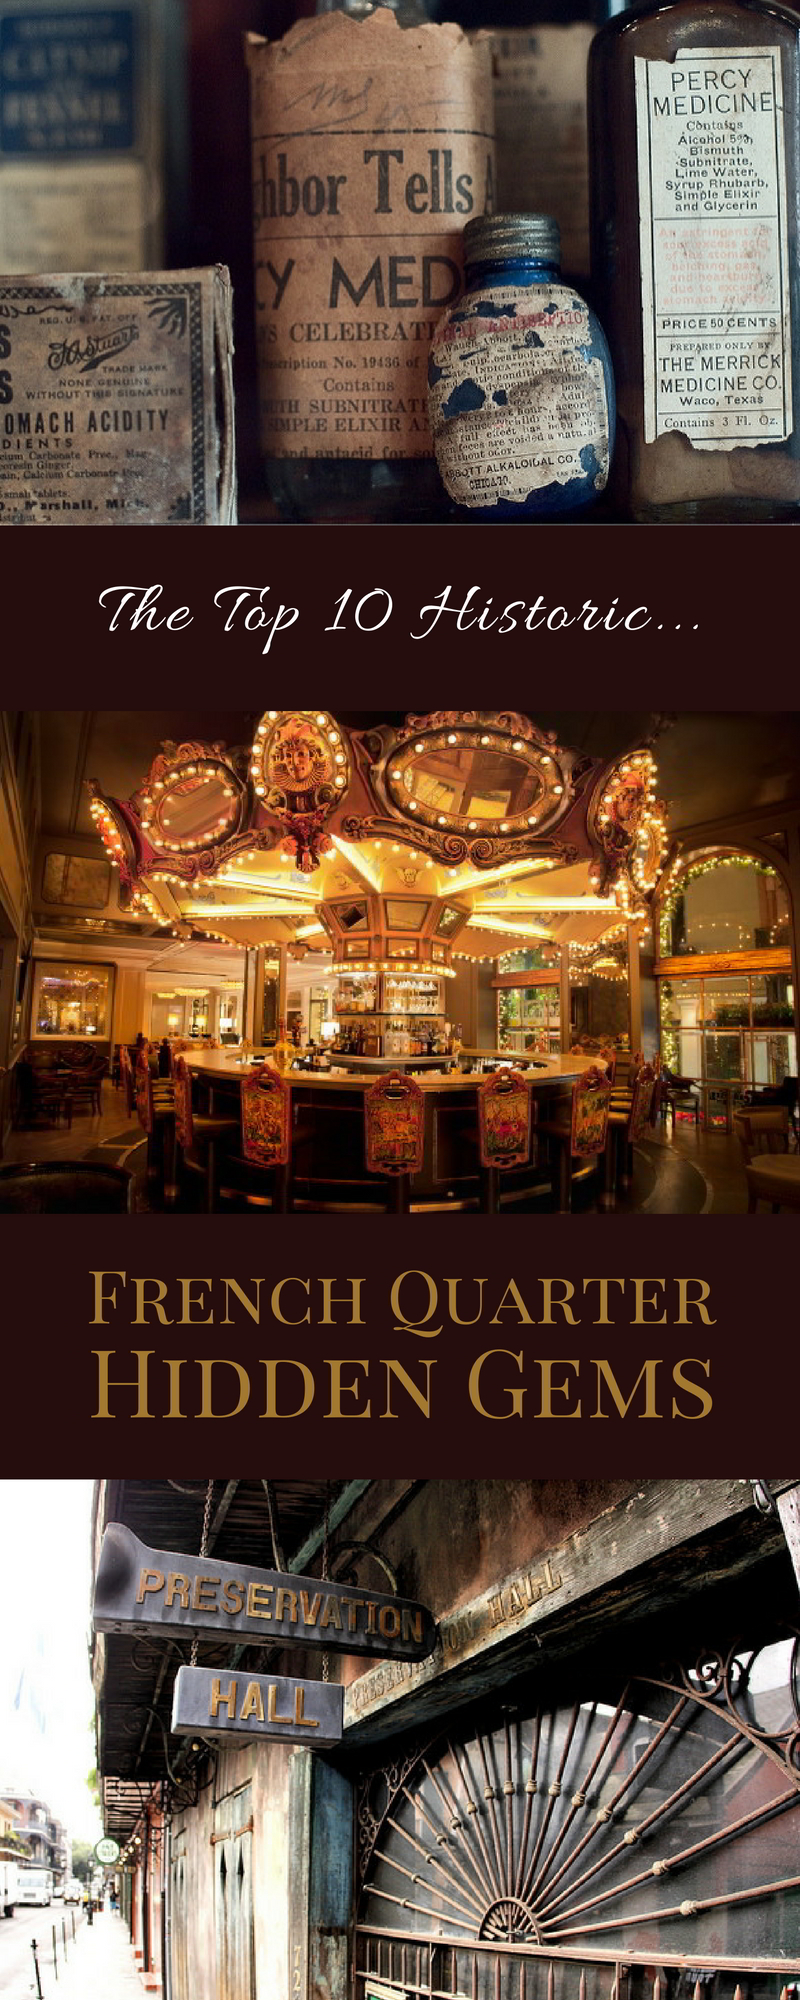 Scope them out all in one day, or tackle them a few at a time: these are the top 10 historic hidden gems in the French Quarter of New Orleans.